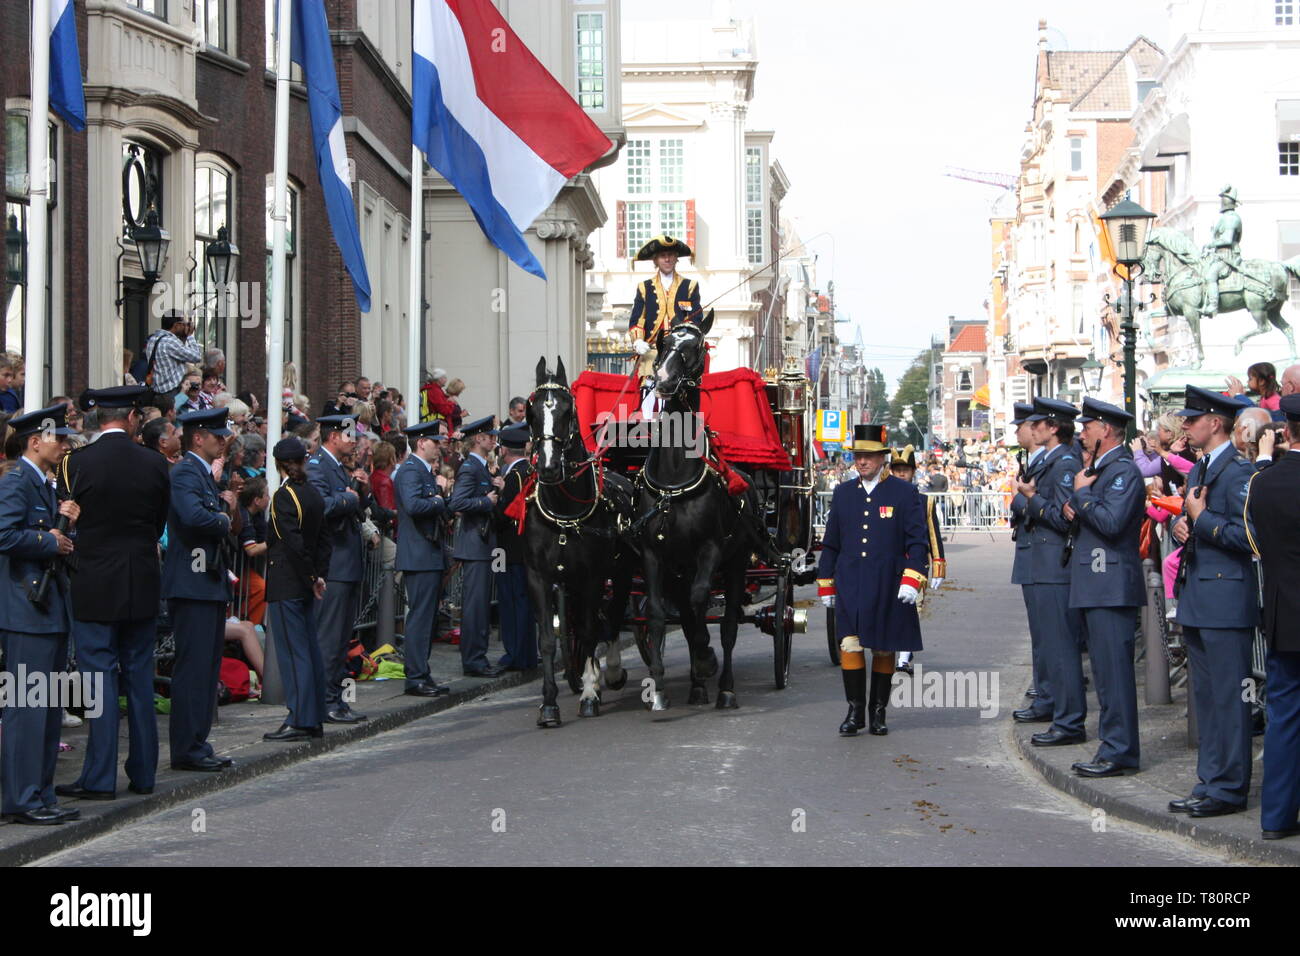 The Royal procession started from Noordeine Palace to the Ridderzaal in the Hague on Prinsjesdag (opening of the parliamentary year by Queen) Stock Photo